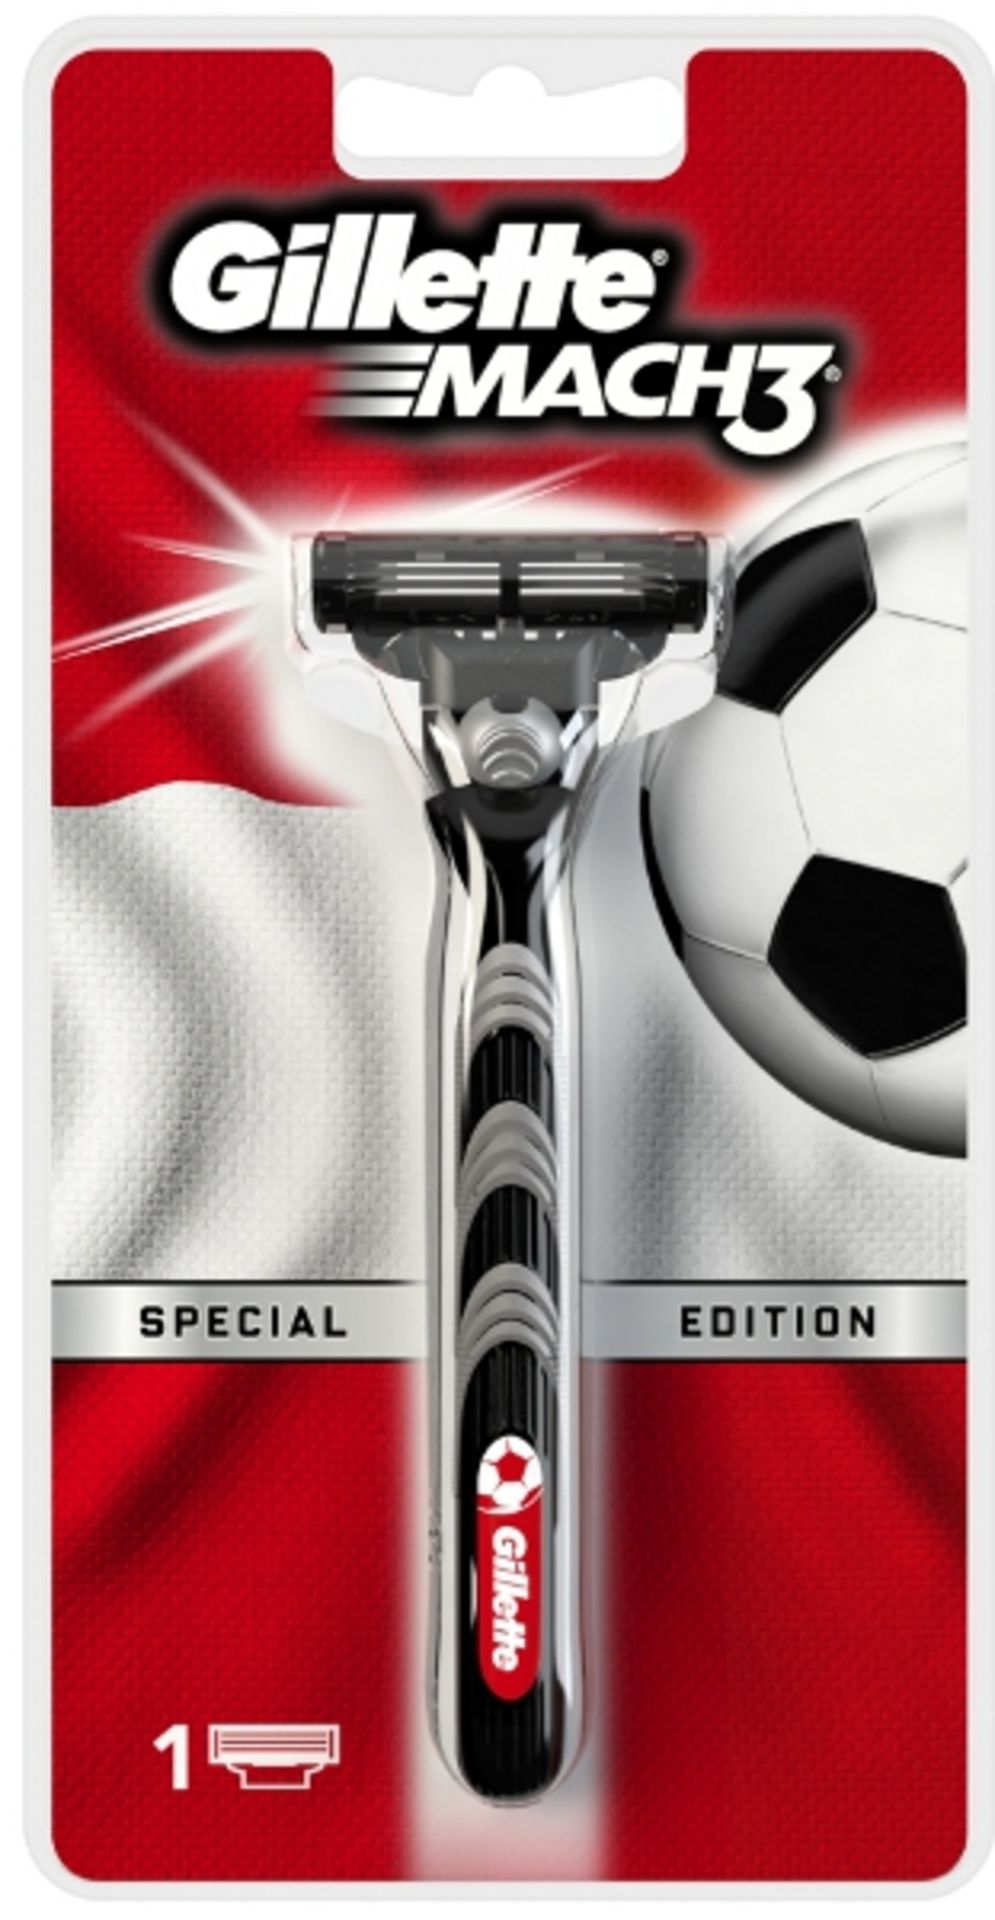 V *TRADE QTY* Brand New Gillette Mach3 Football Special Edition X 10 YOUR BID PRICE TO BE MULTIPLIED